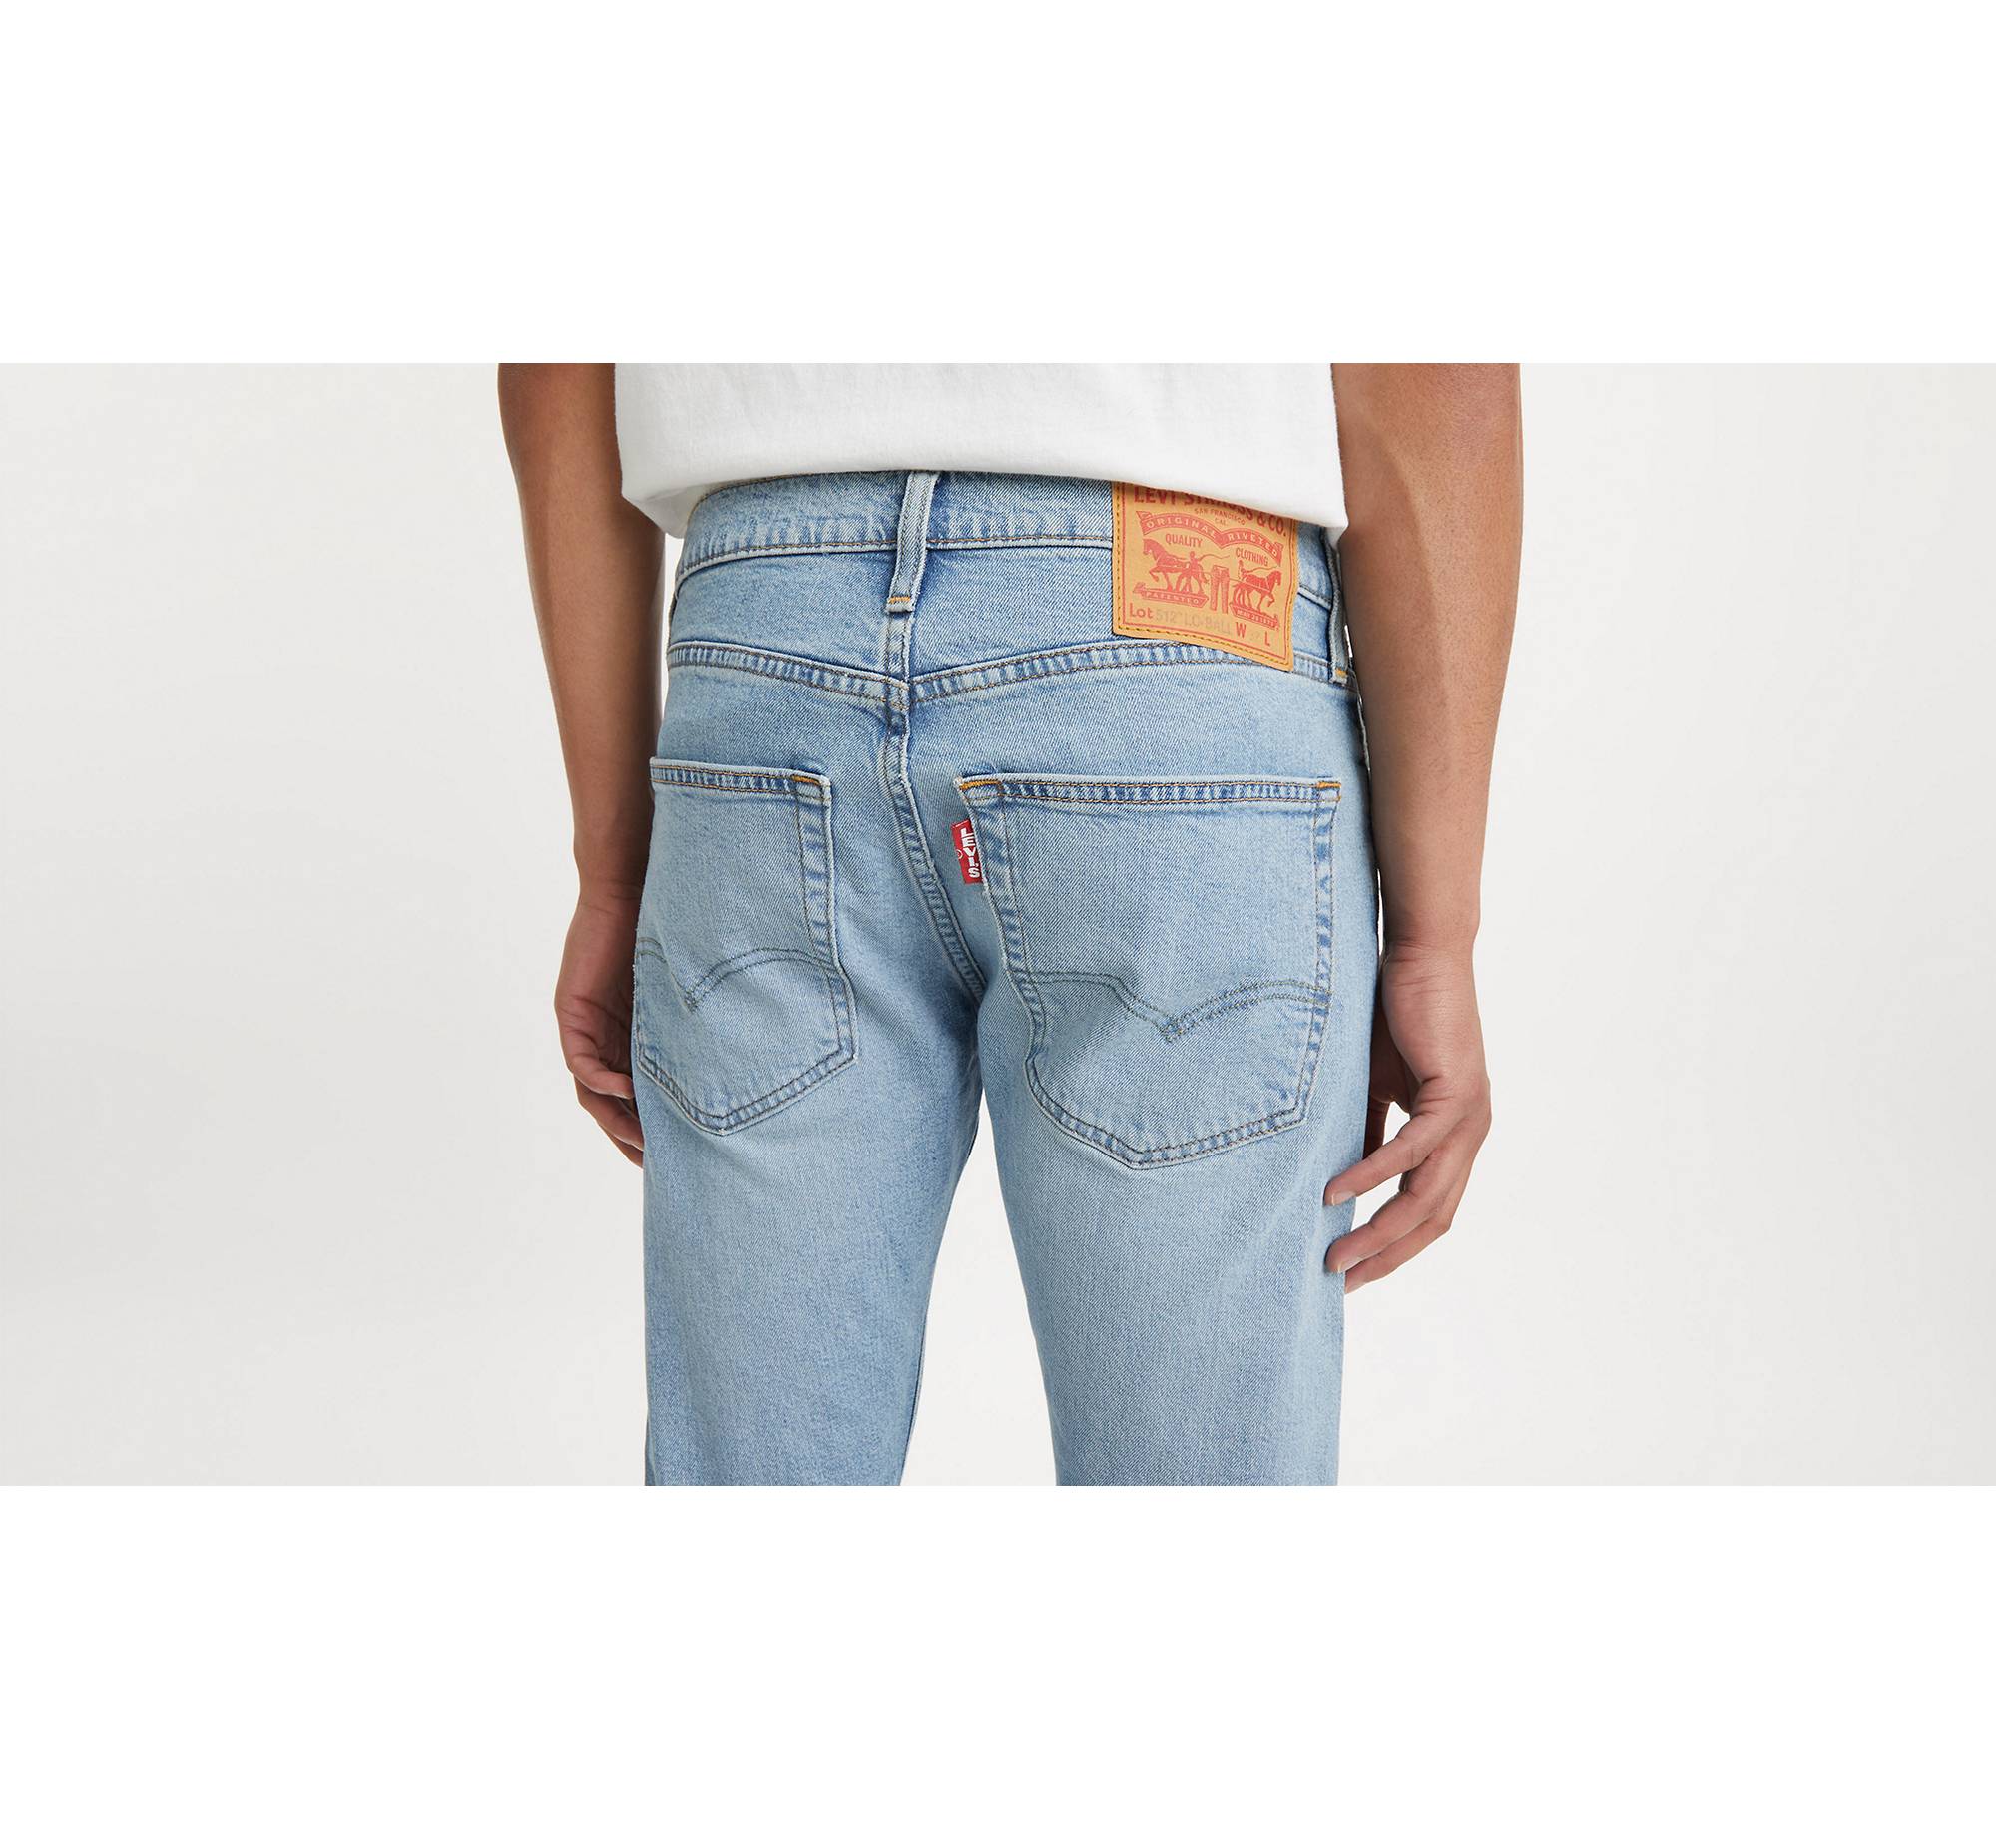 512™ Slim Tapered Lo-ball Jeans - Blue | Levi's® GR